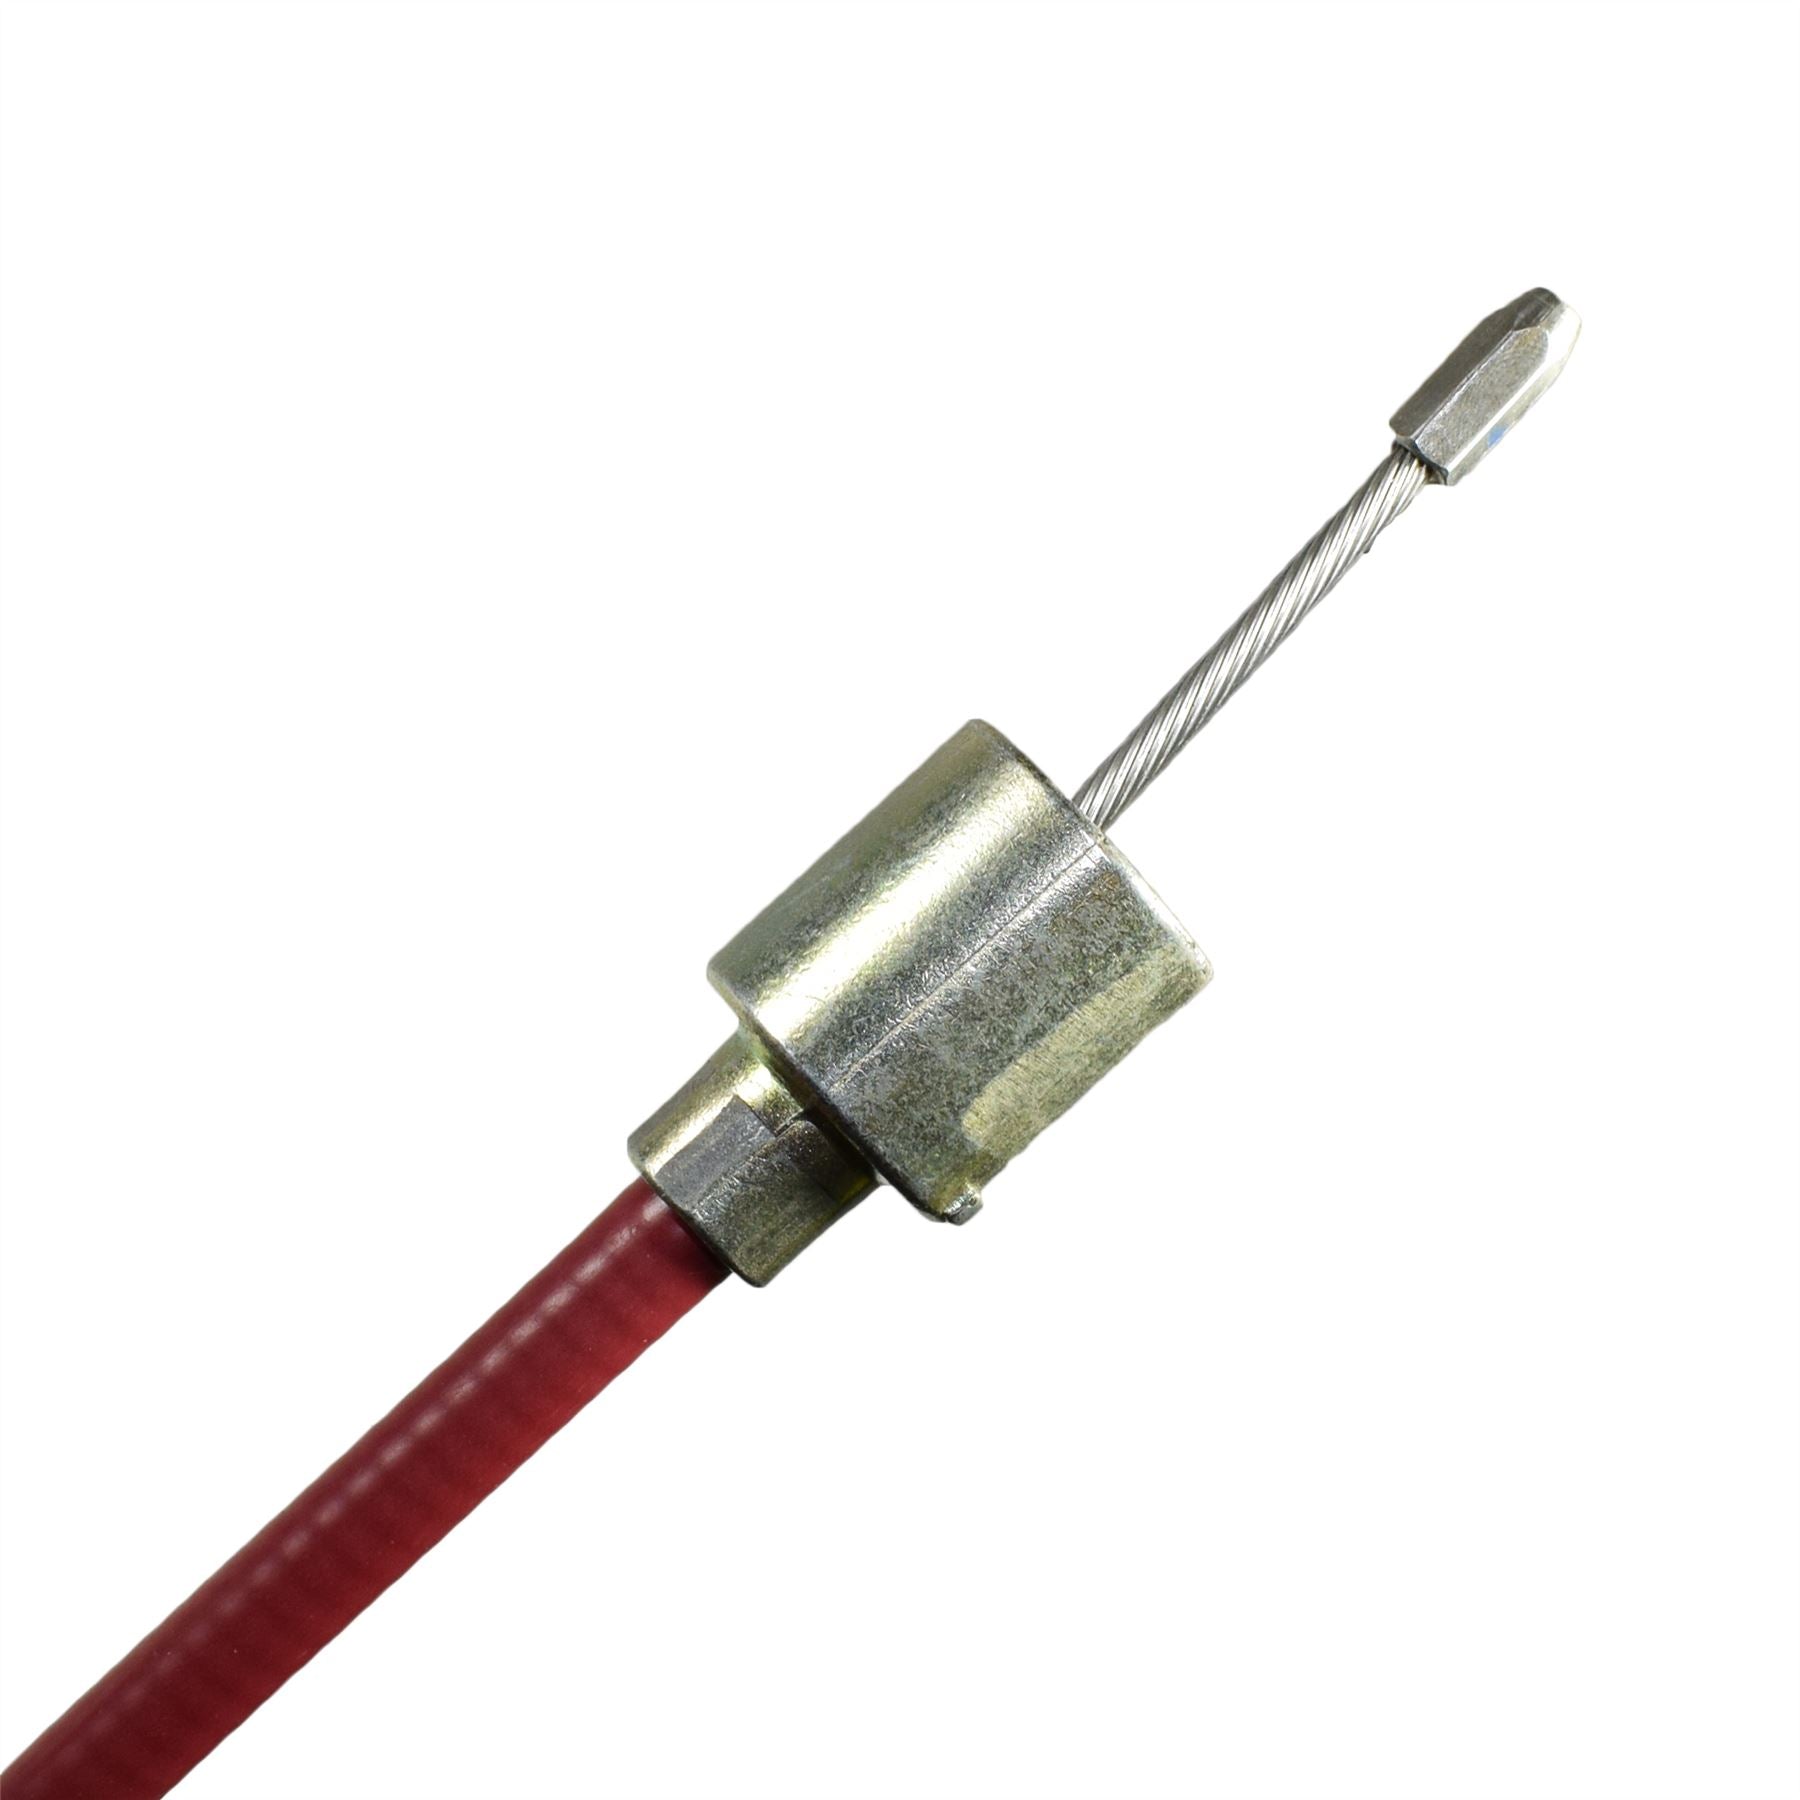 Stainless Steel Detachable ALKO Quick release brake cables with mushroom ends